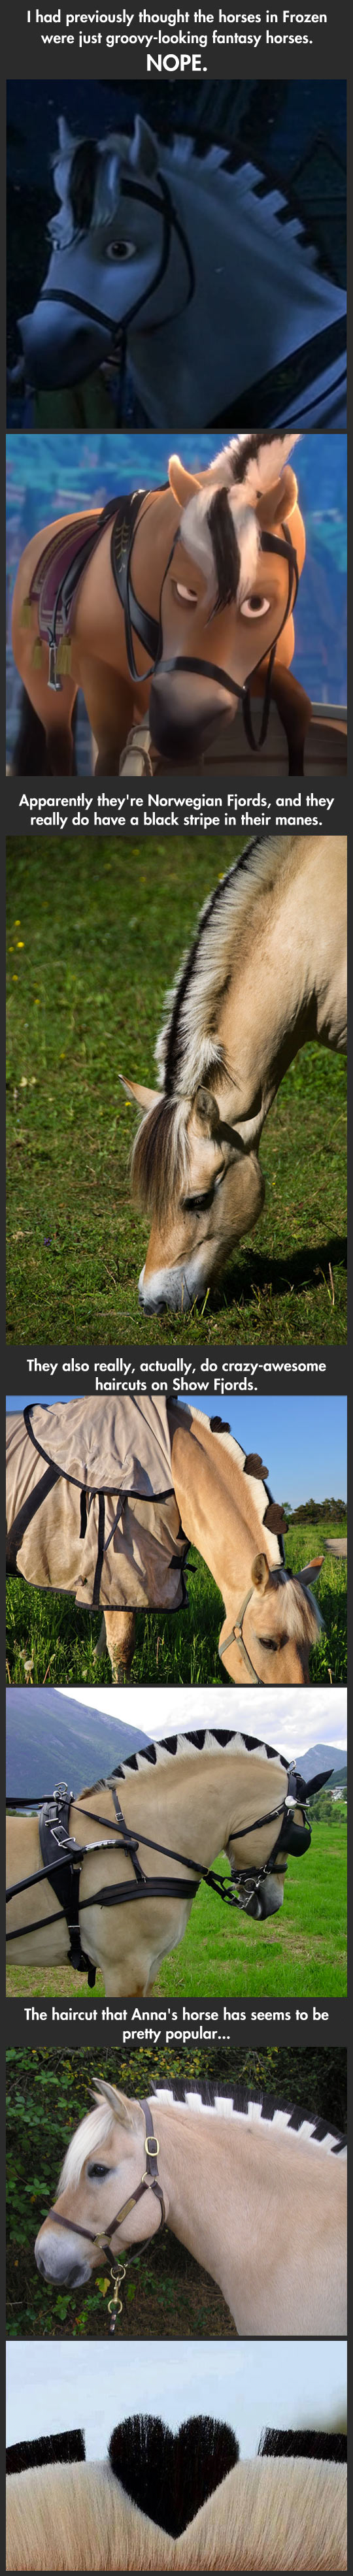 The horses in Frozen are real…